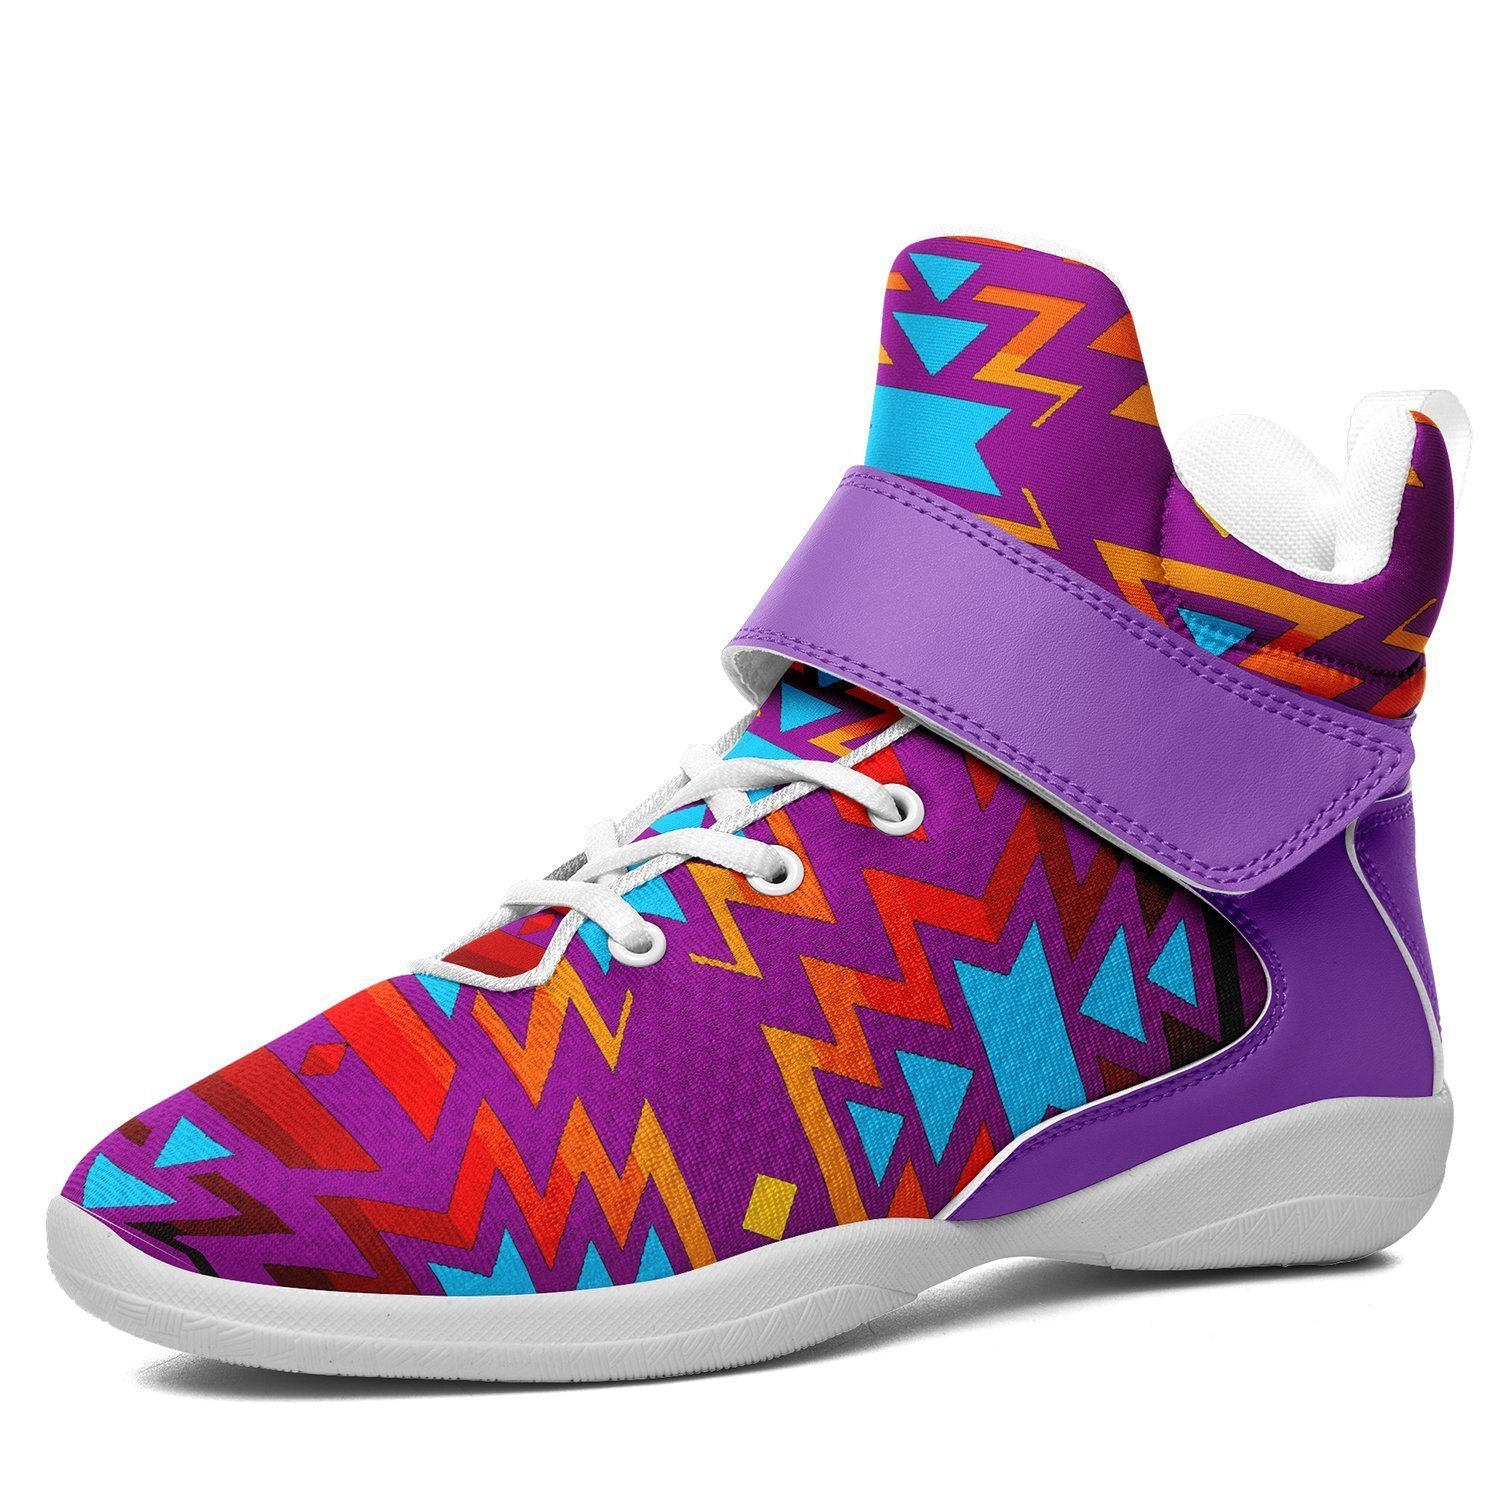 Fire Colors and Turquoise Purple Ipottaa Basketball / Sport High Top Shoes - White Sole 49 Dzine US Men 7 / EUR 40 White Sole with Lavender Strap 